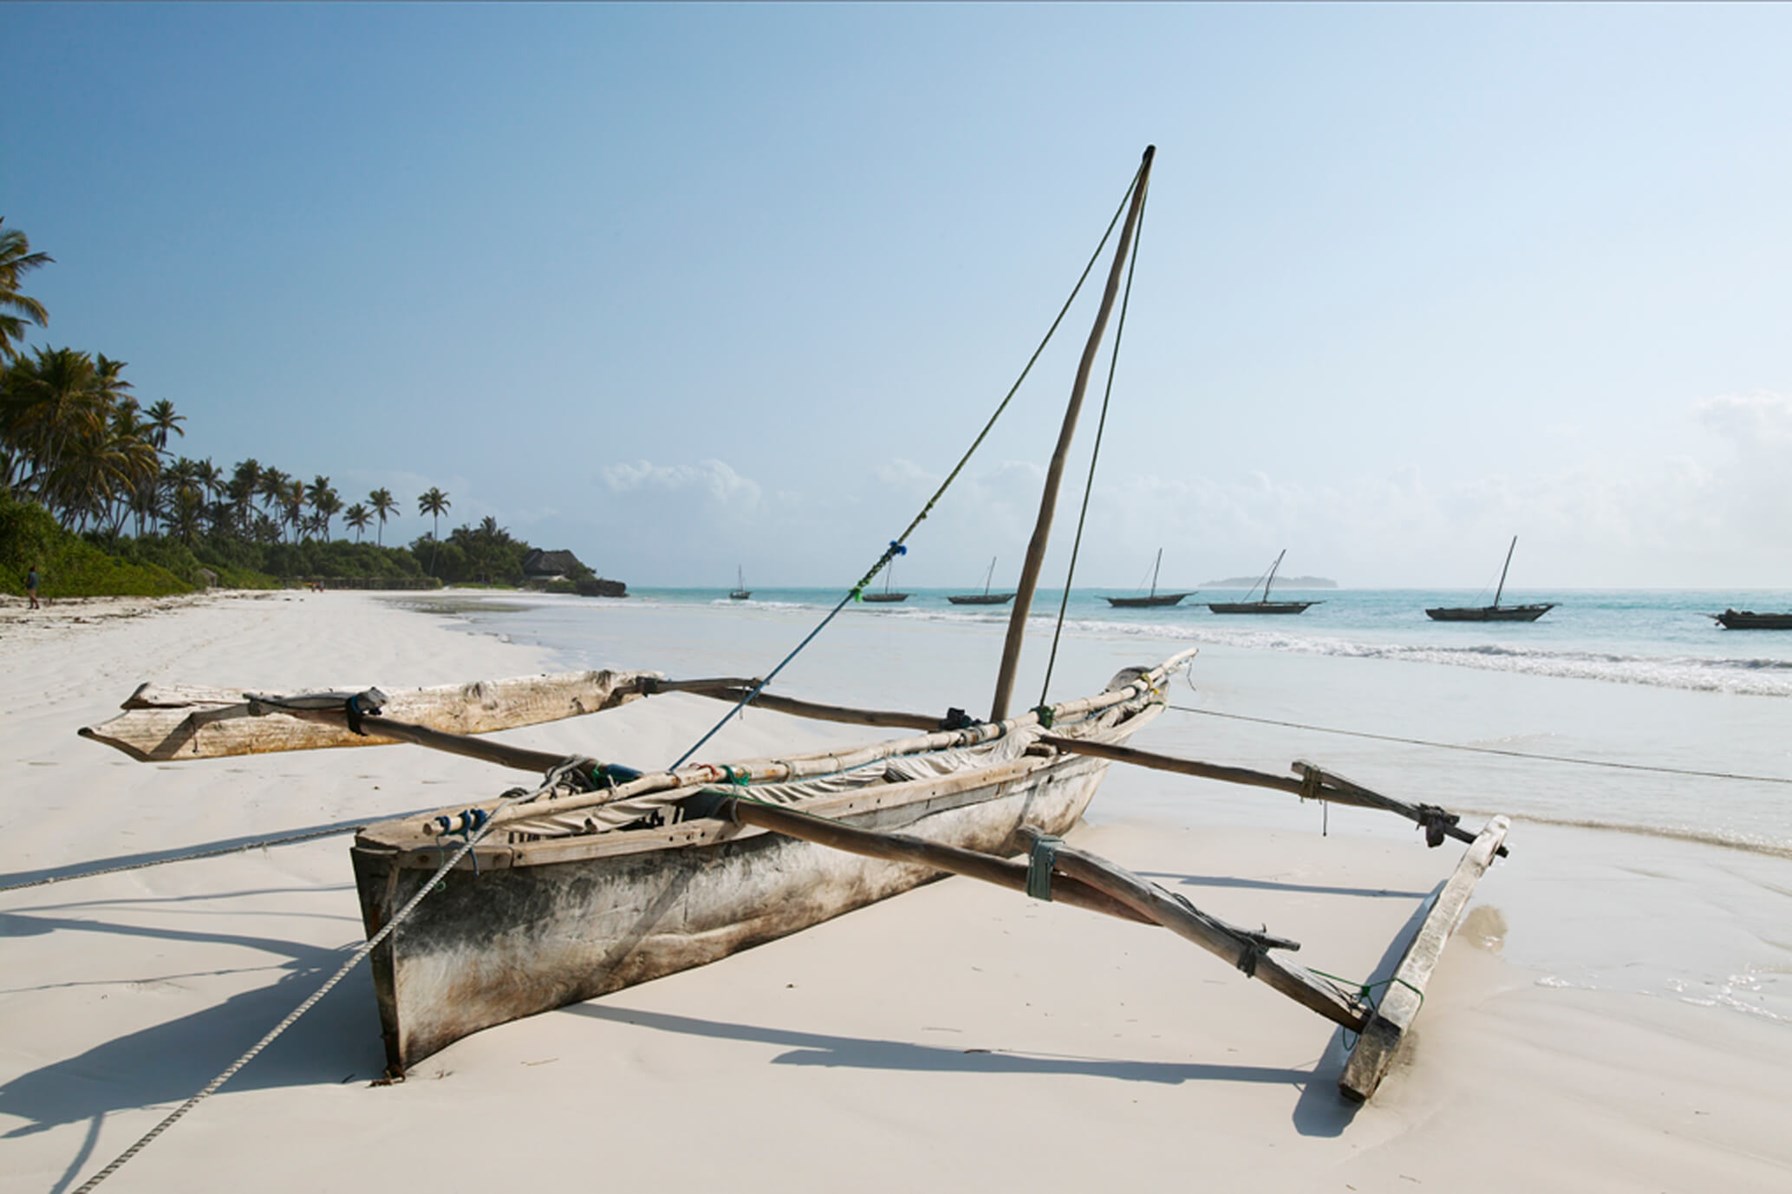 Dhow boat on the beach with sea in front of it and other dhow boats off the coast of Zanzibar